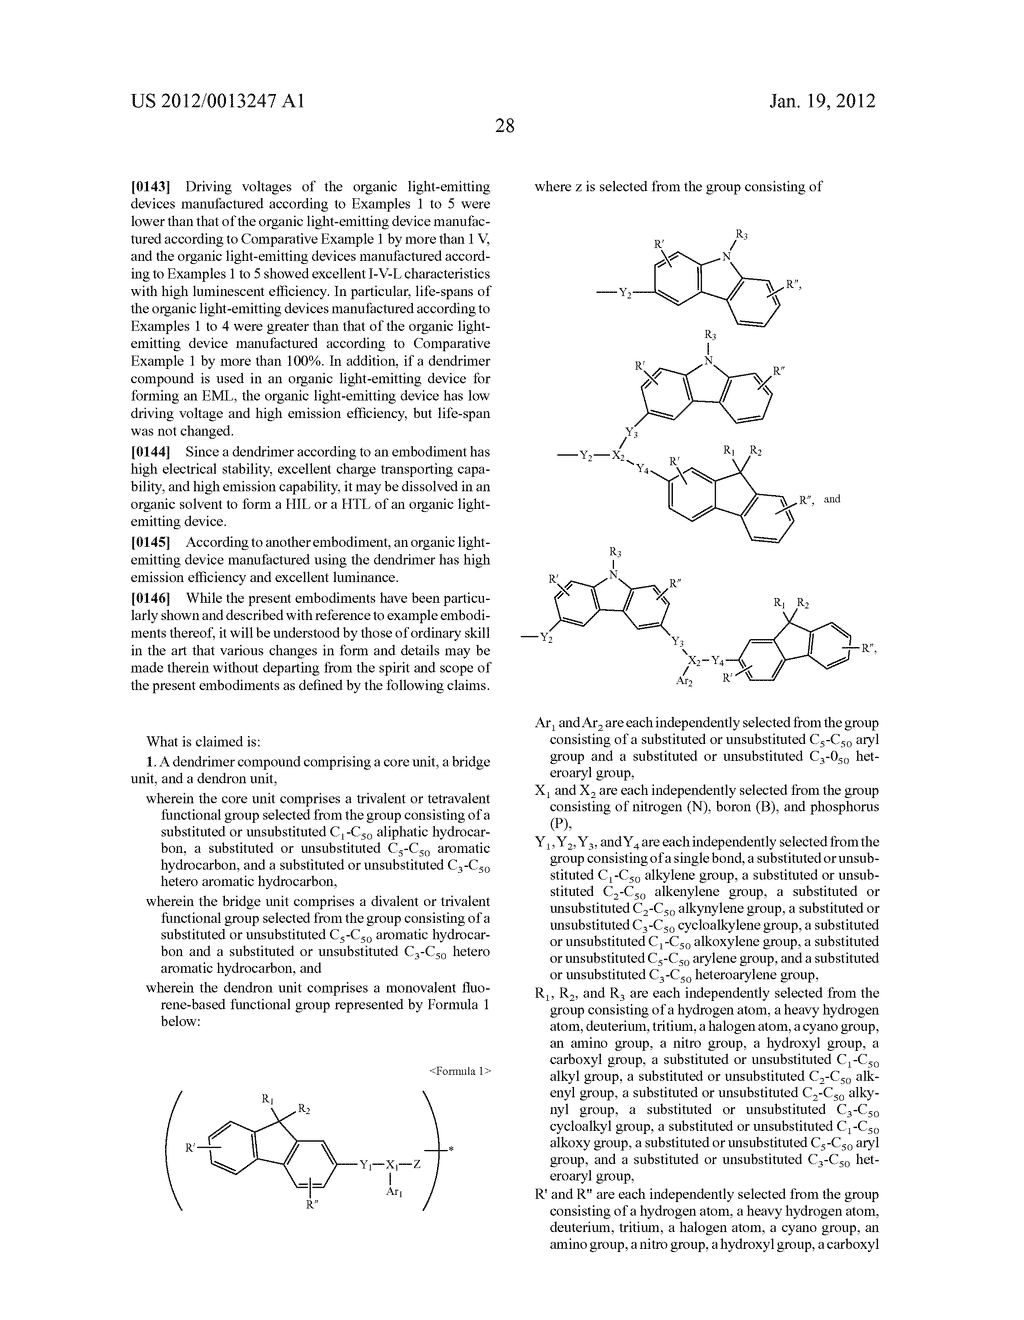 DENDRIMER AND ORGANIC LIGHT-EMITTING DEVICE USING THE SAME - diagram, schematic, and image 30